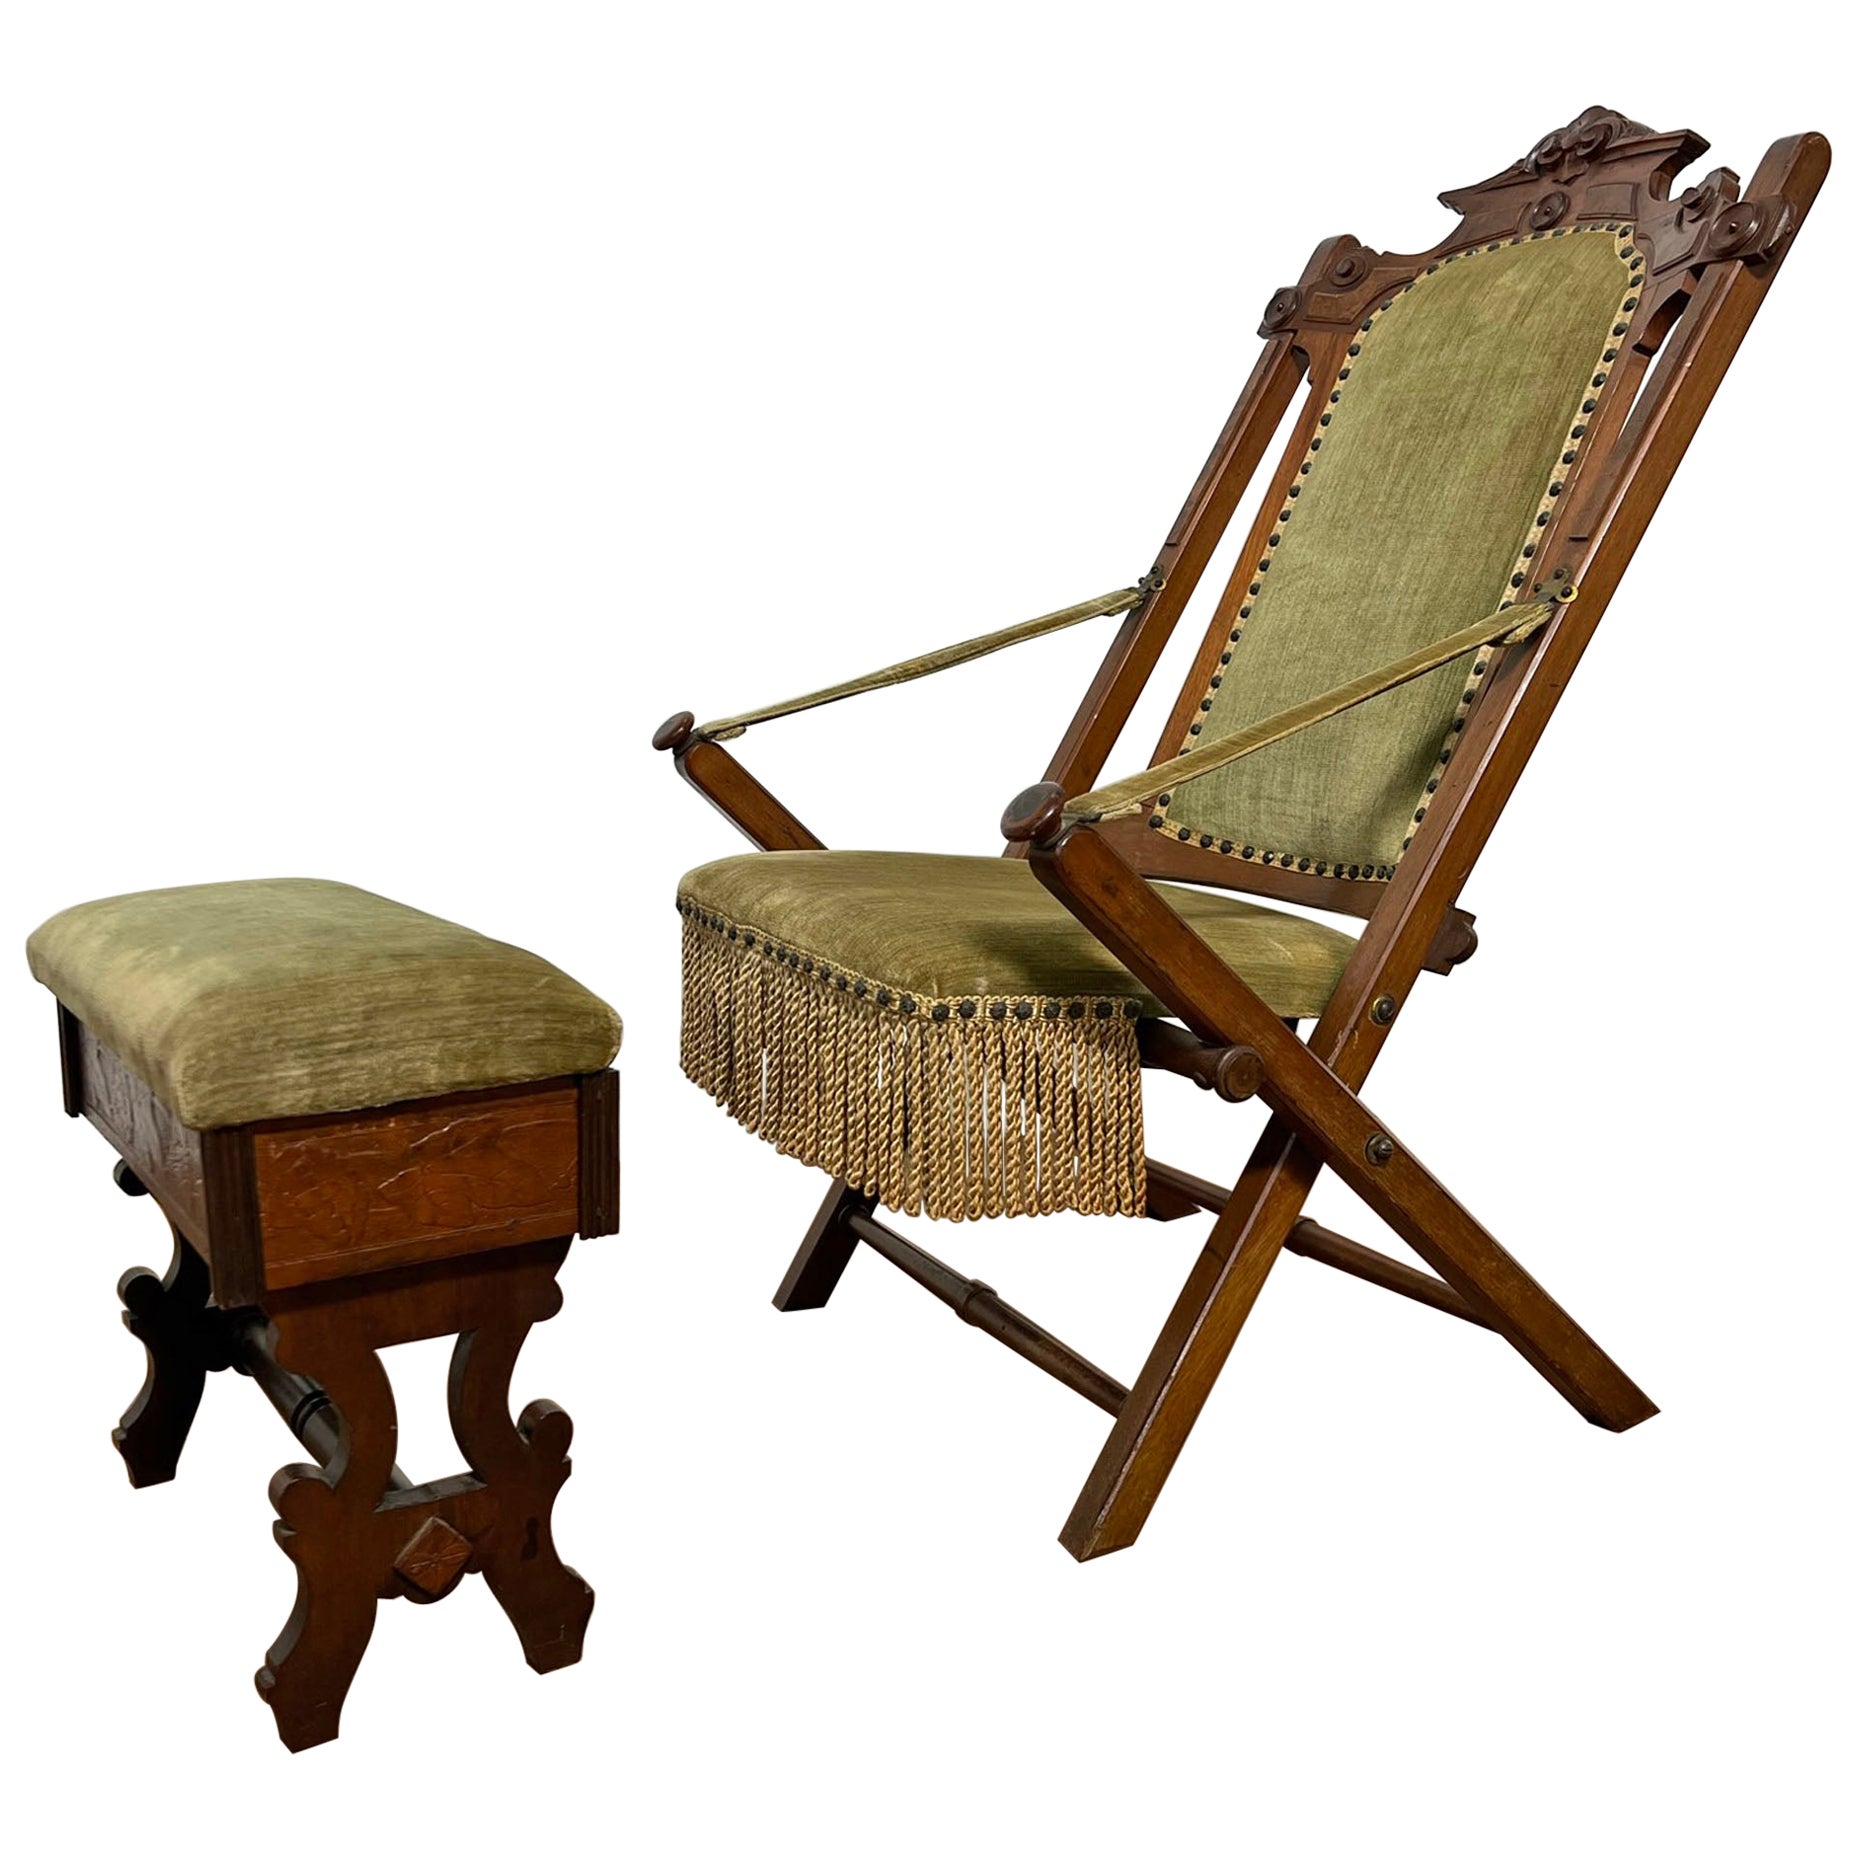 Victorian Era Campaign Chair with Lidded Ottoman, circa 1890s For Sale